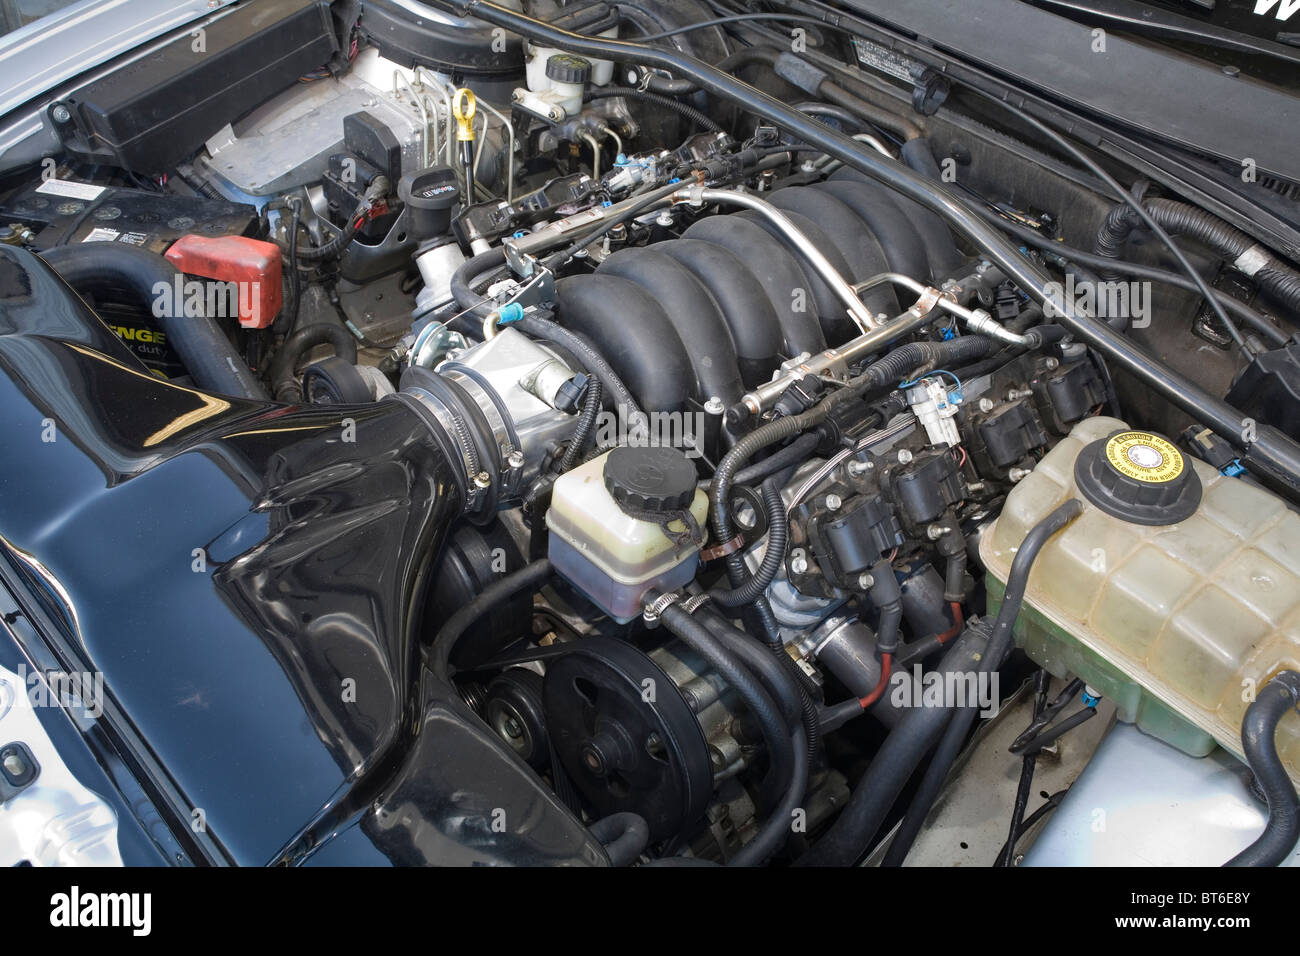 Chevrolet LS1 engine in an Australian Holden Commodore Stock Photo